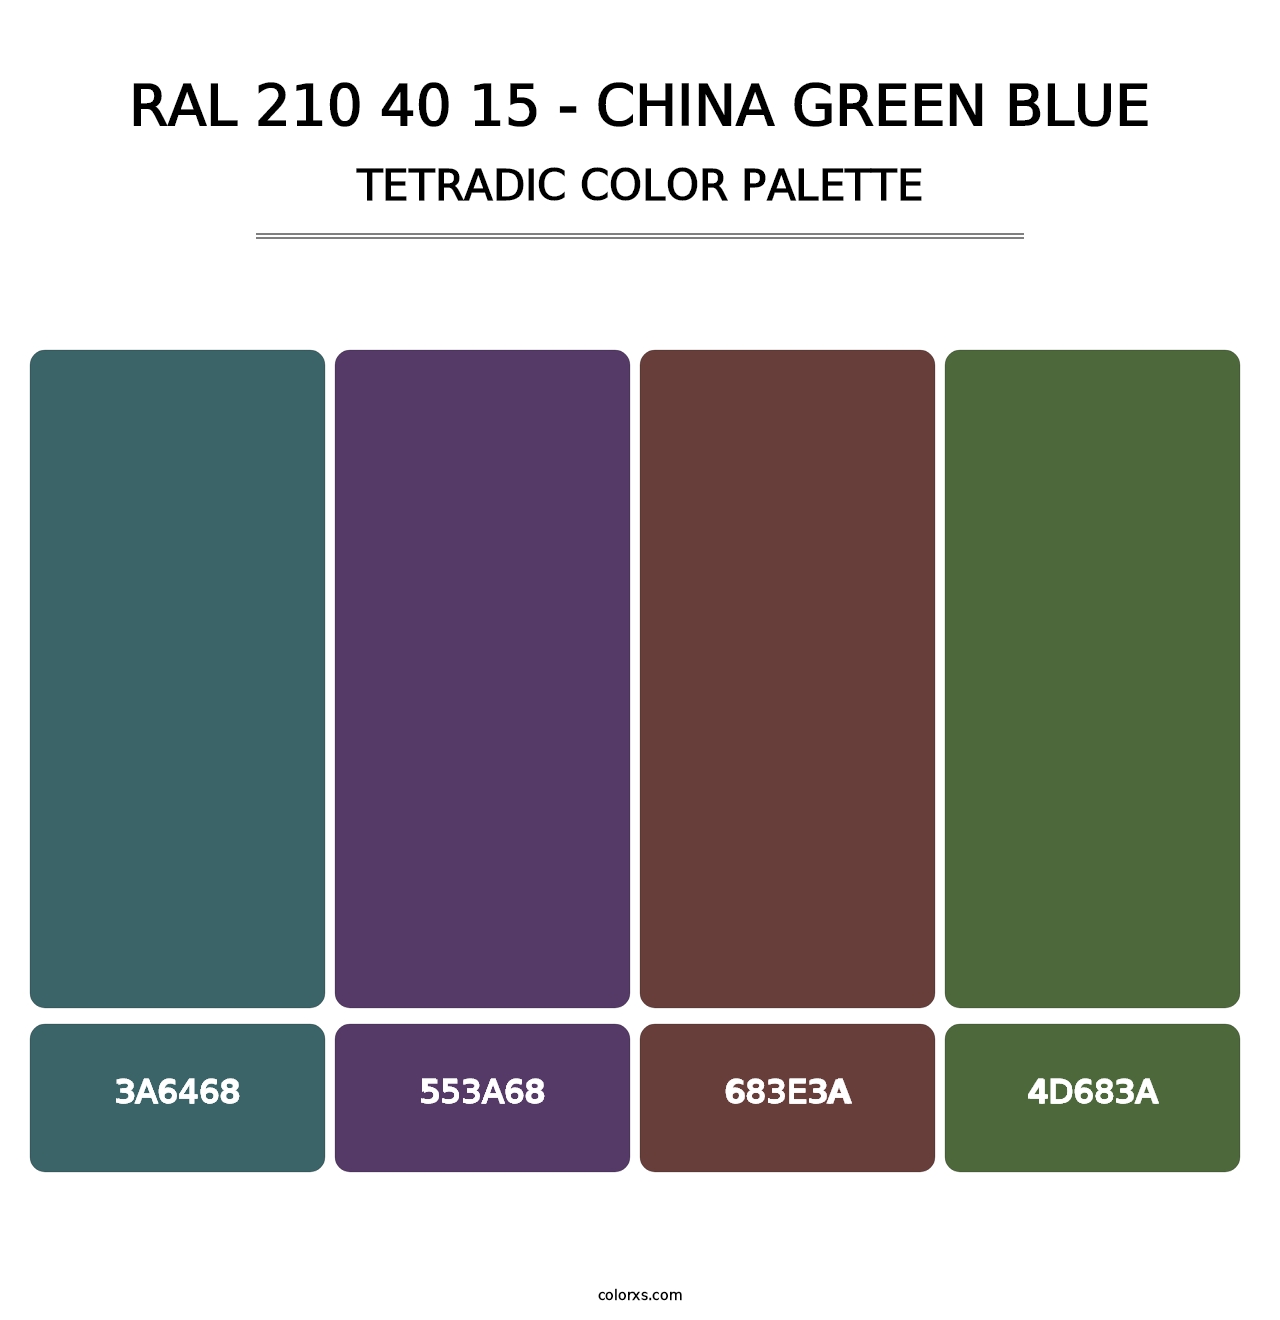 RAL 210 40 15 - China Green Blue - Tetradic Color Palette